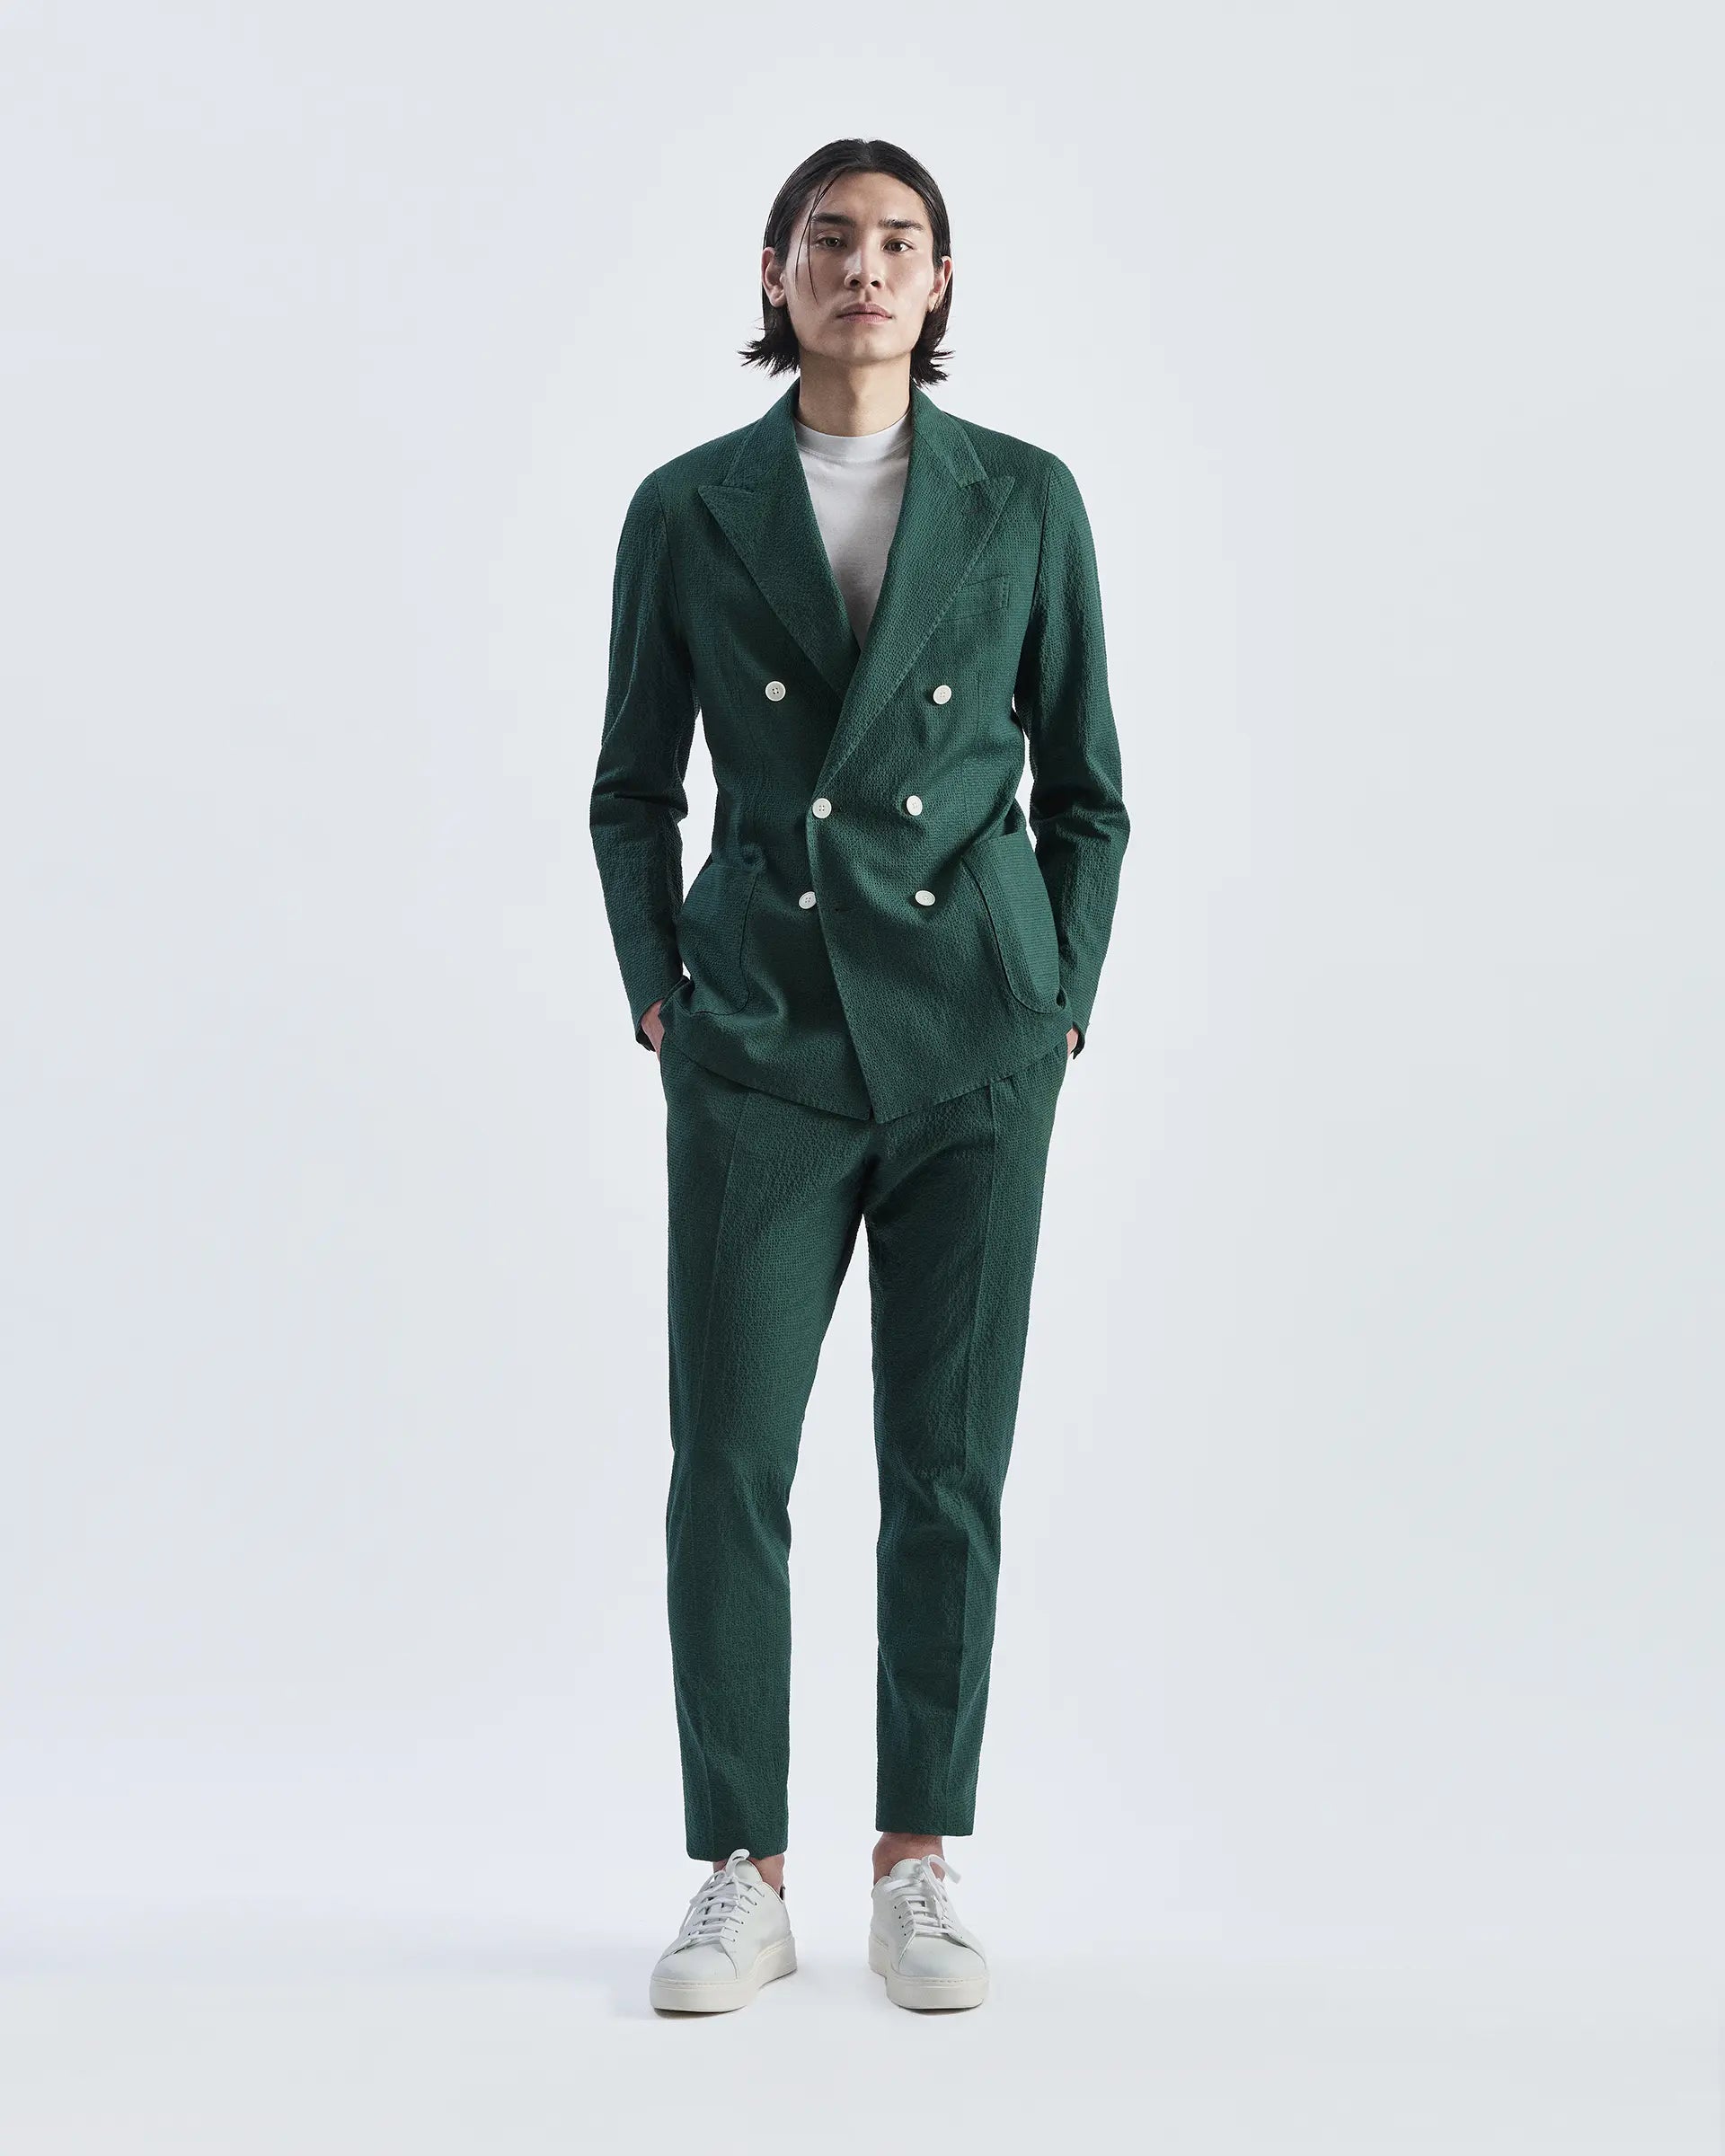 Green double-breasted suit in cotton and linen seersuker Subalpino fabric